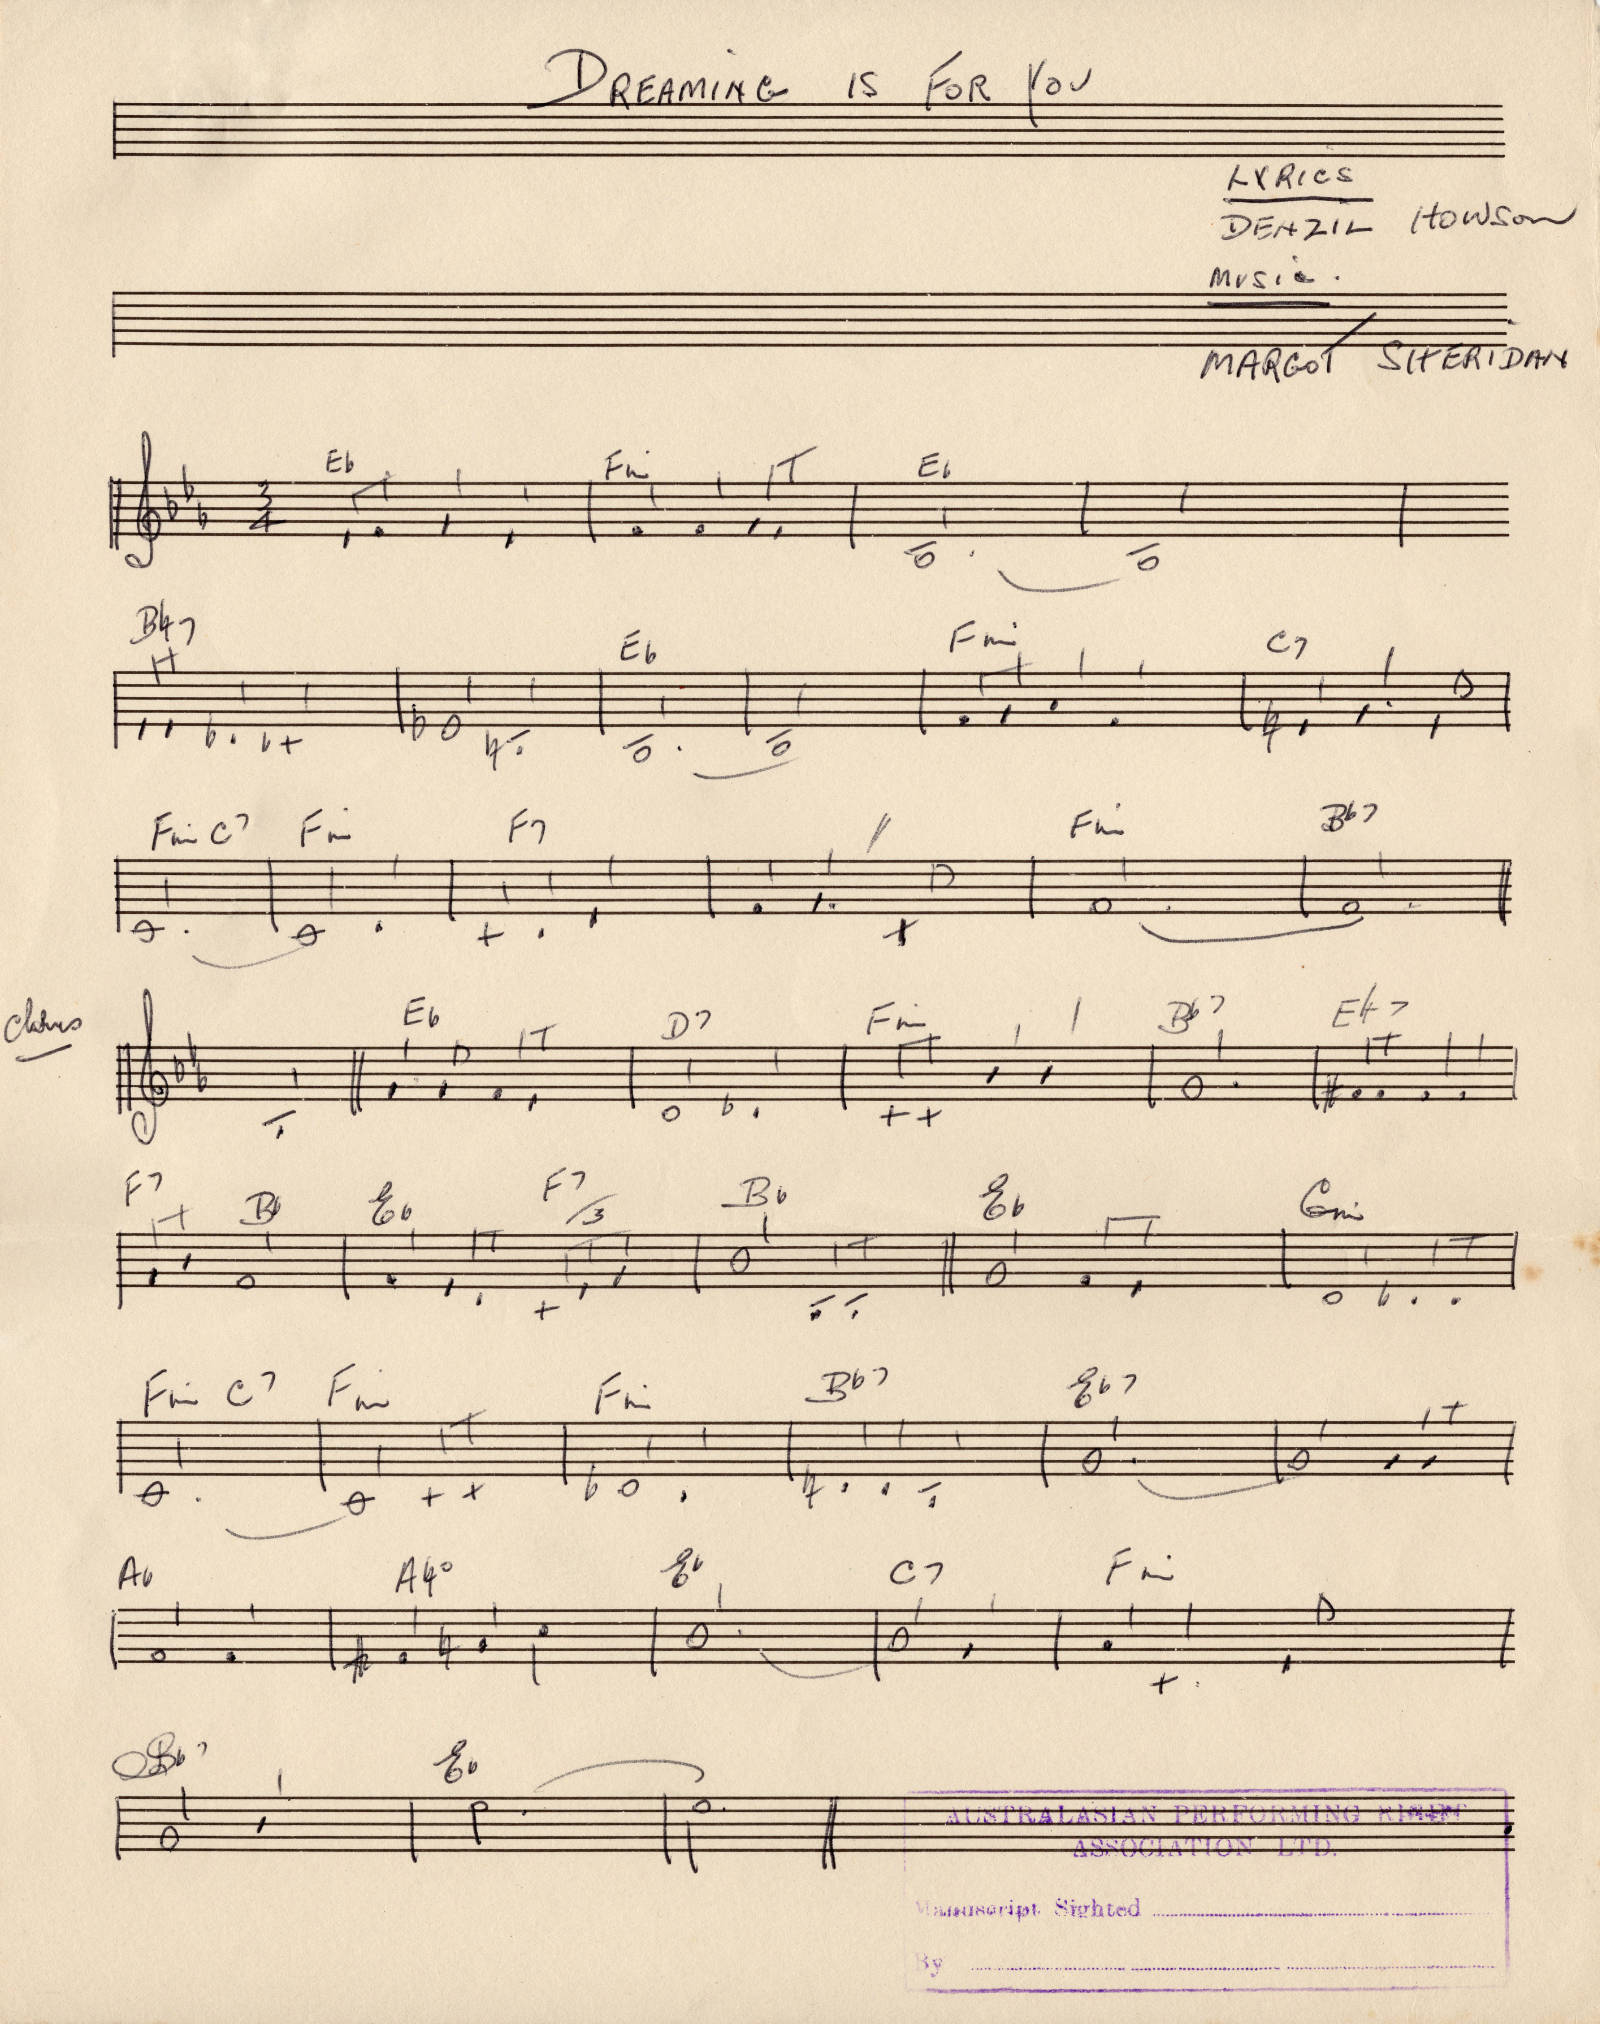 music score of “Dreaming is for You” song